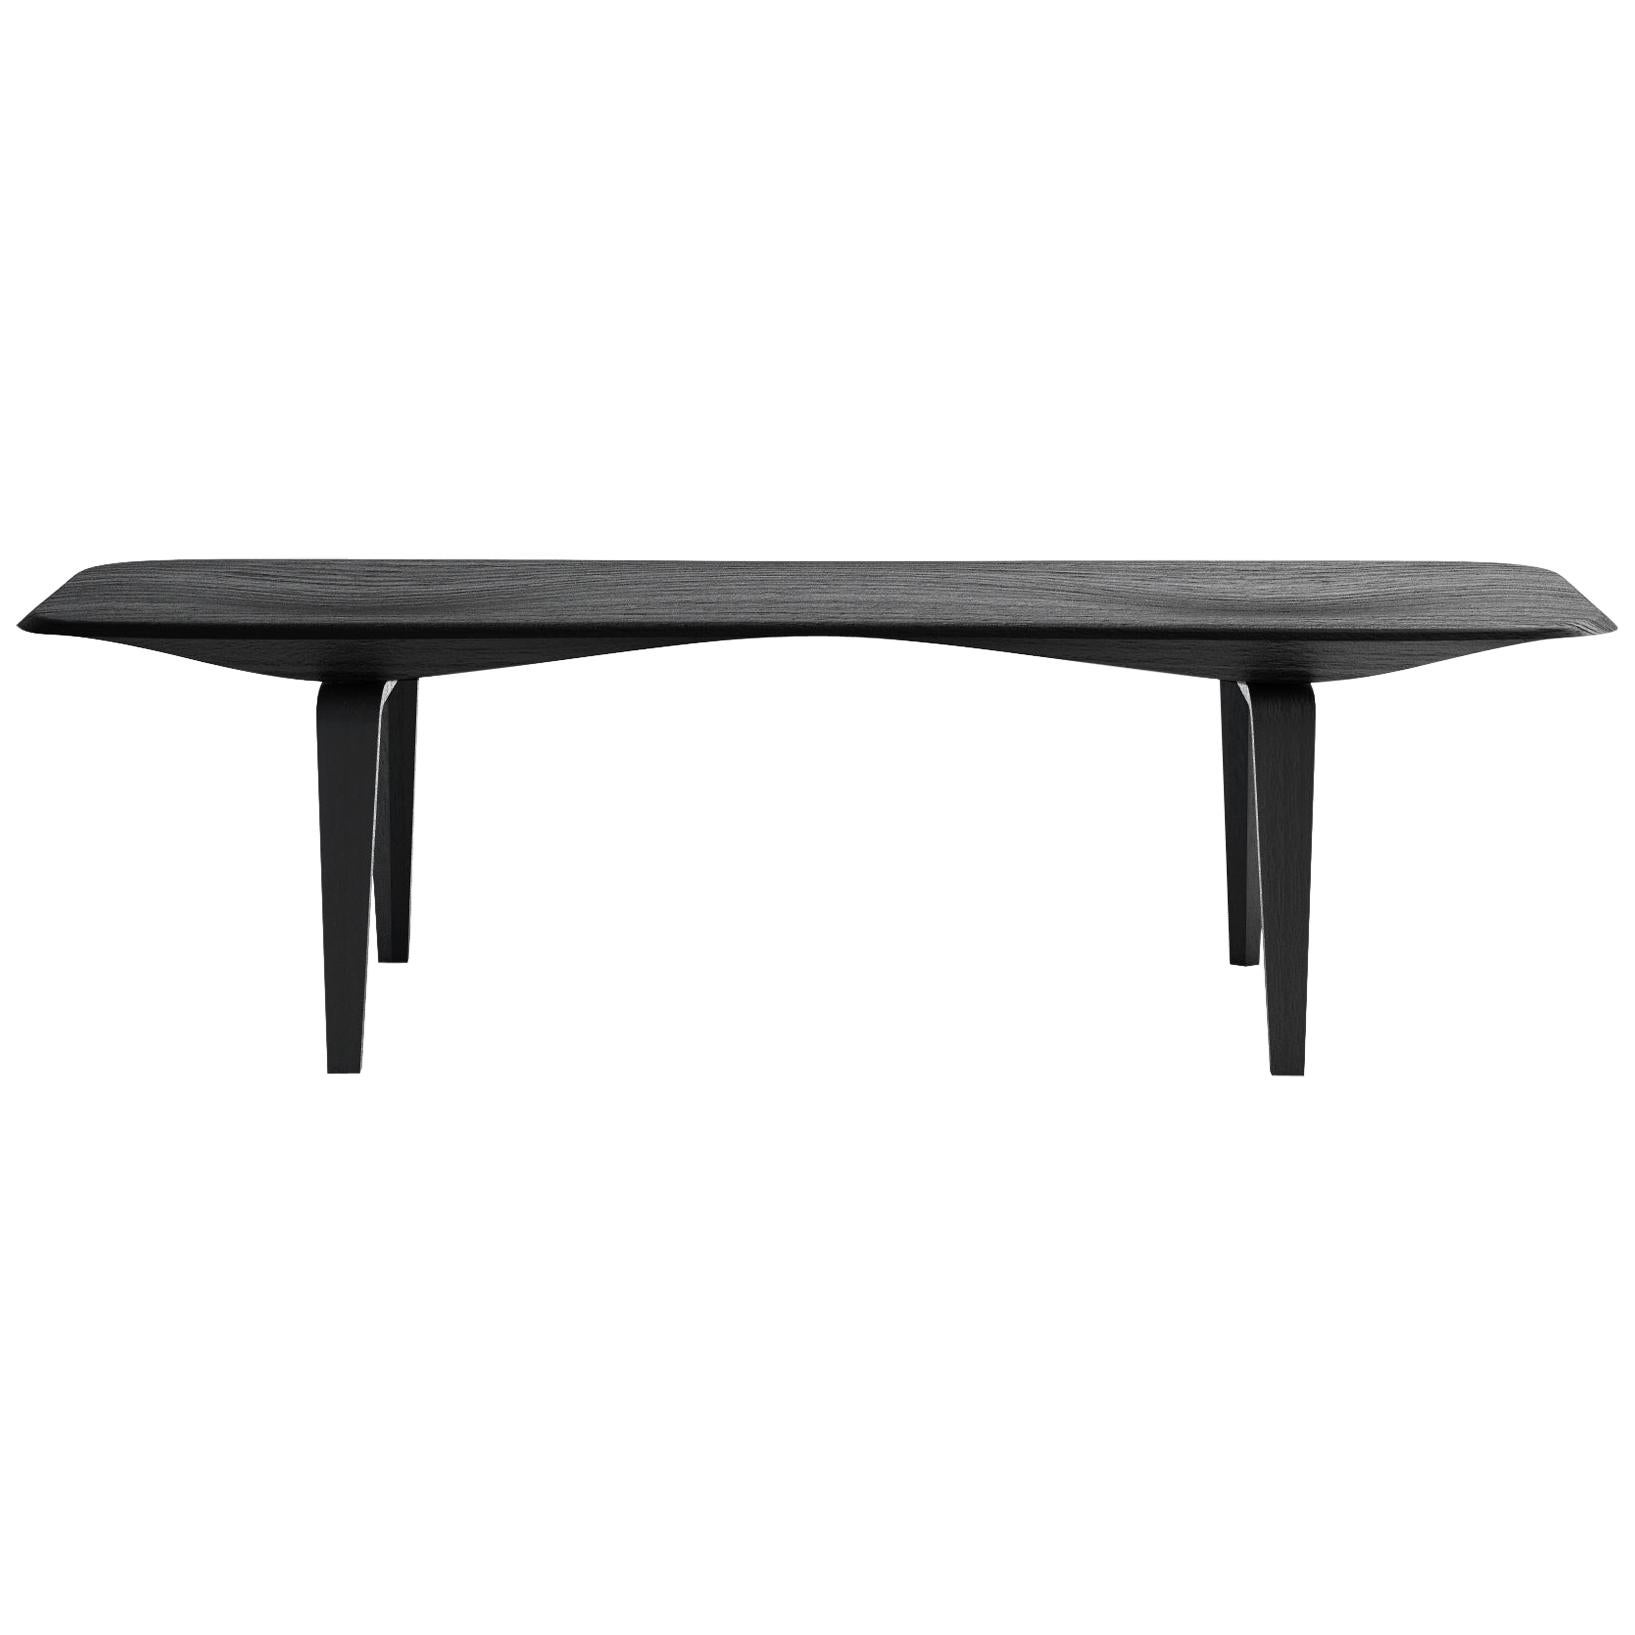 Ebonized Oakwood Bench with Carved Top by Miduny, Made in Italy